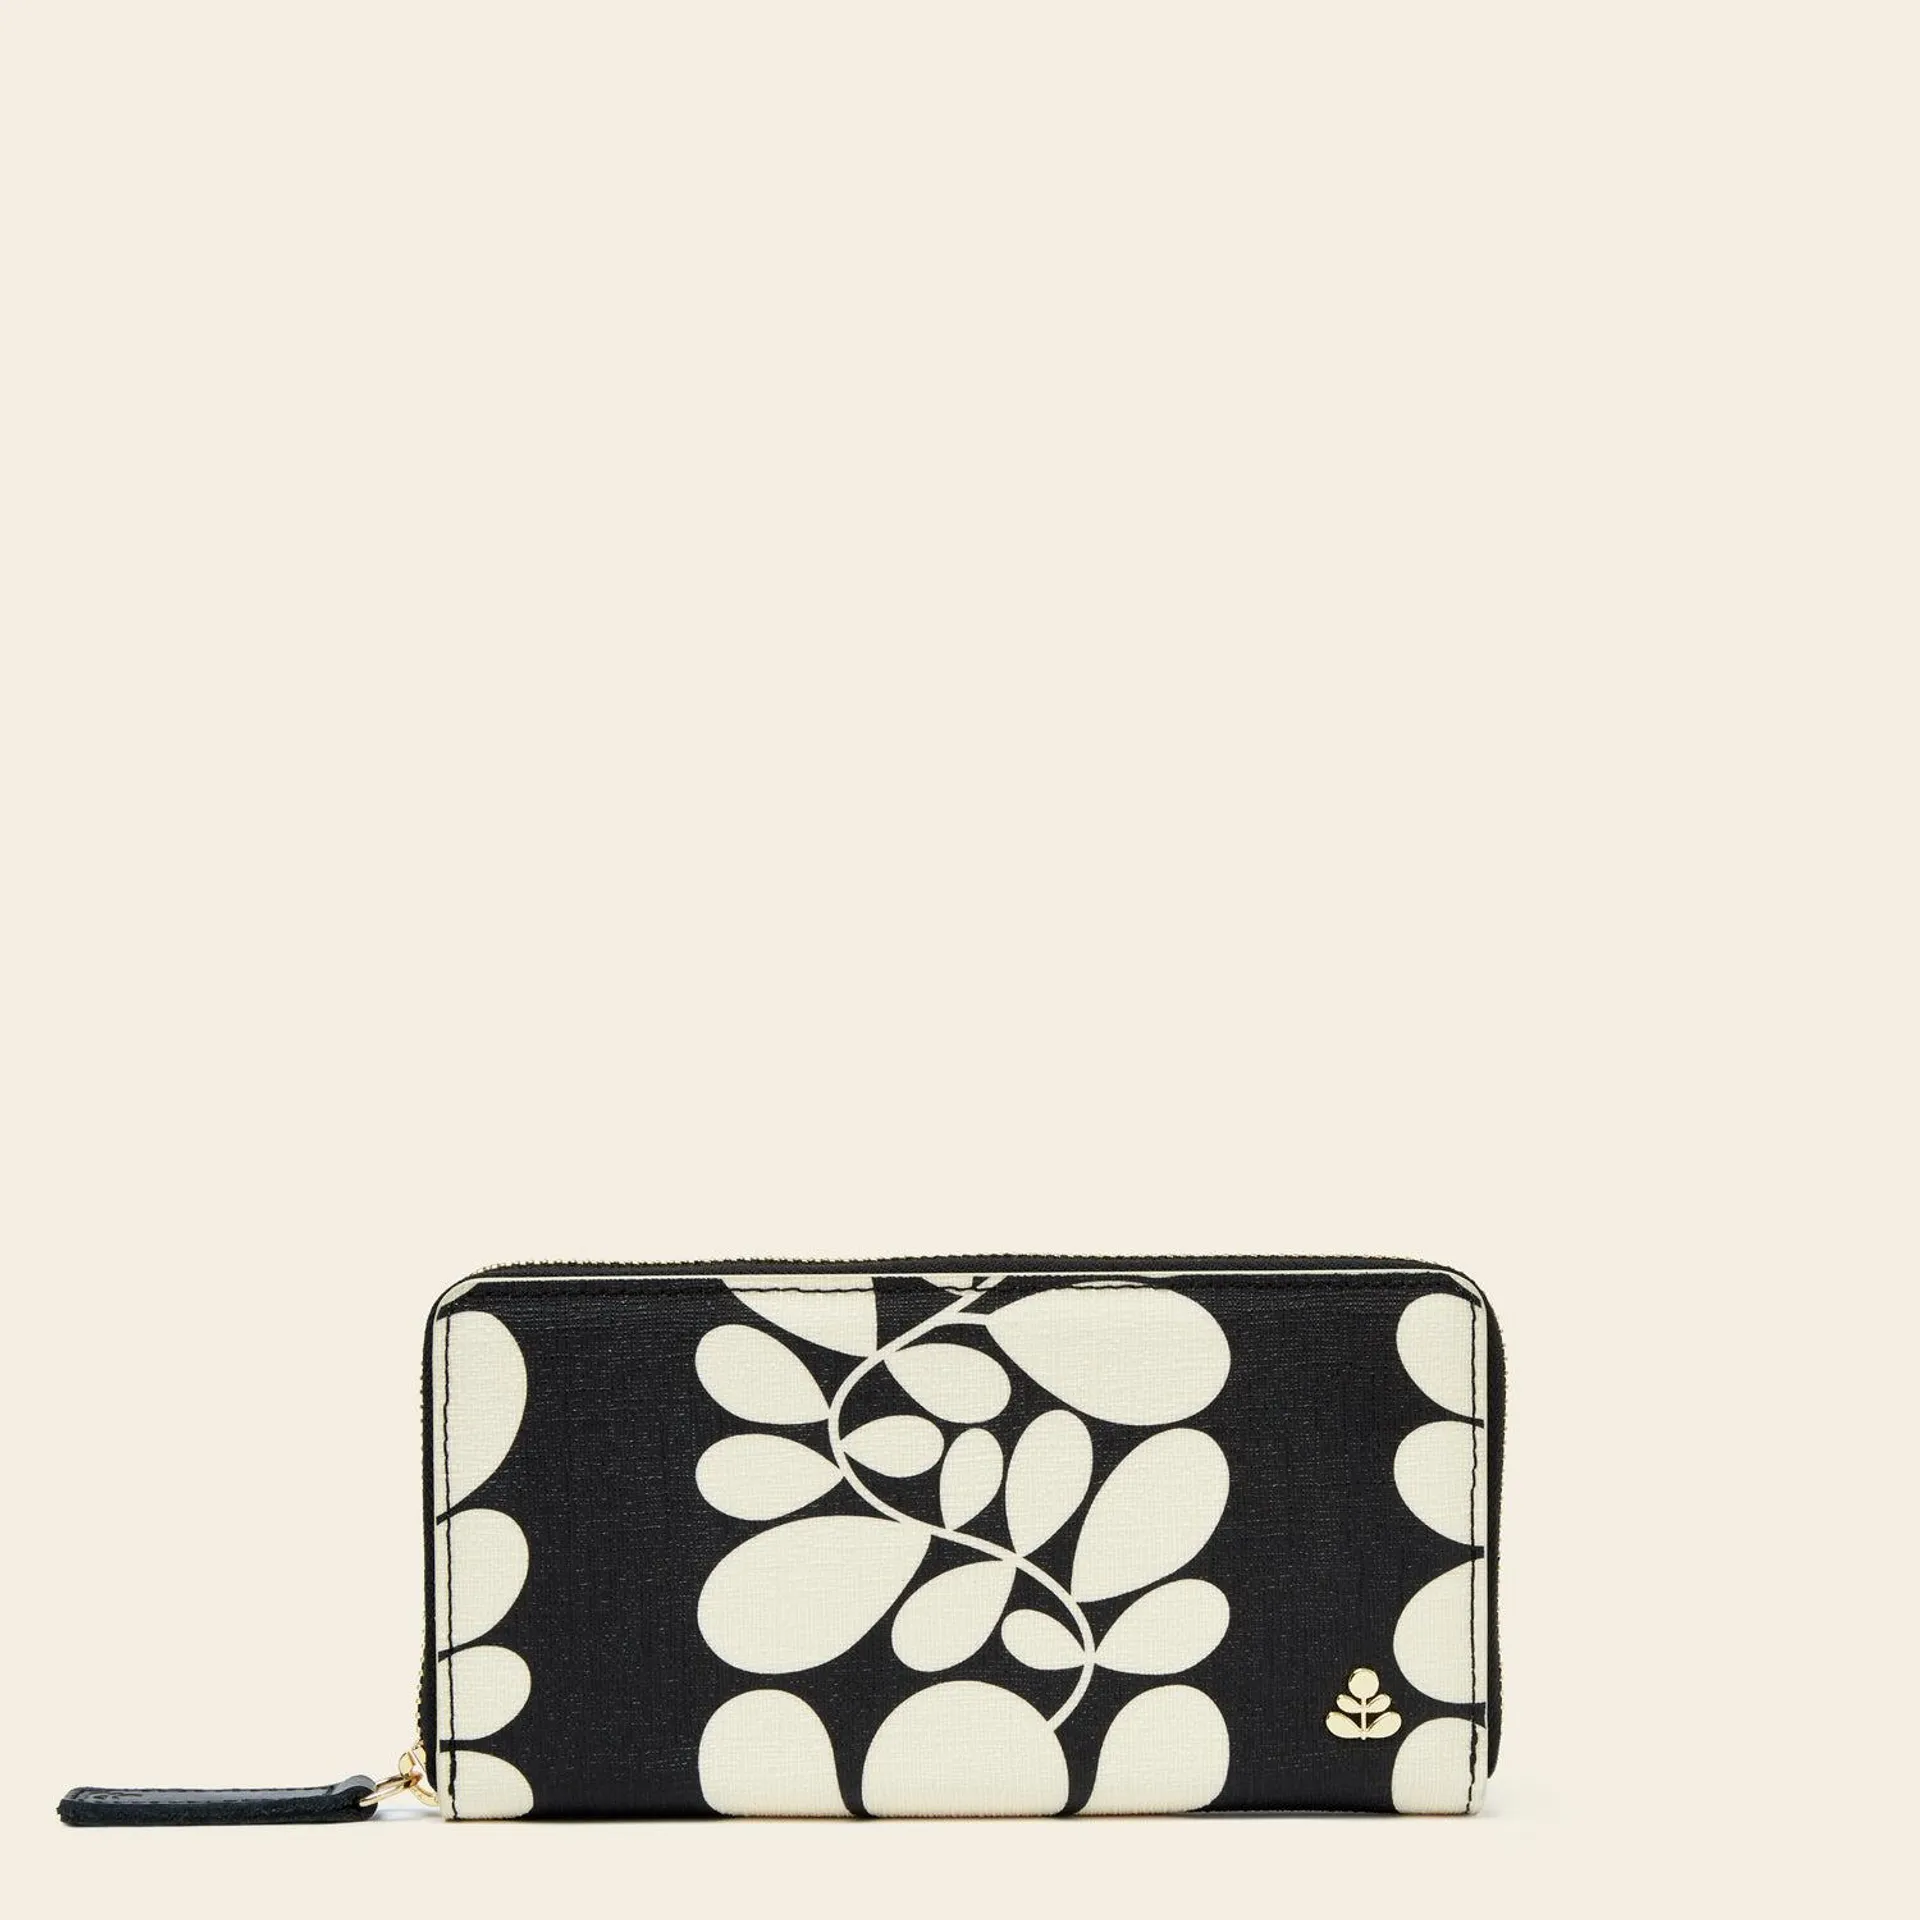 Forget Me Not City Wallet in Sycamore Stripe Black